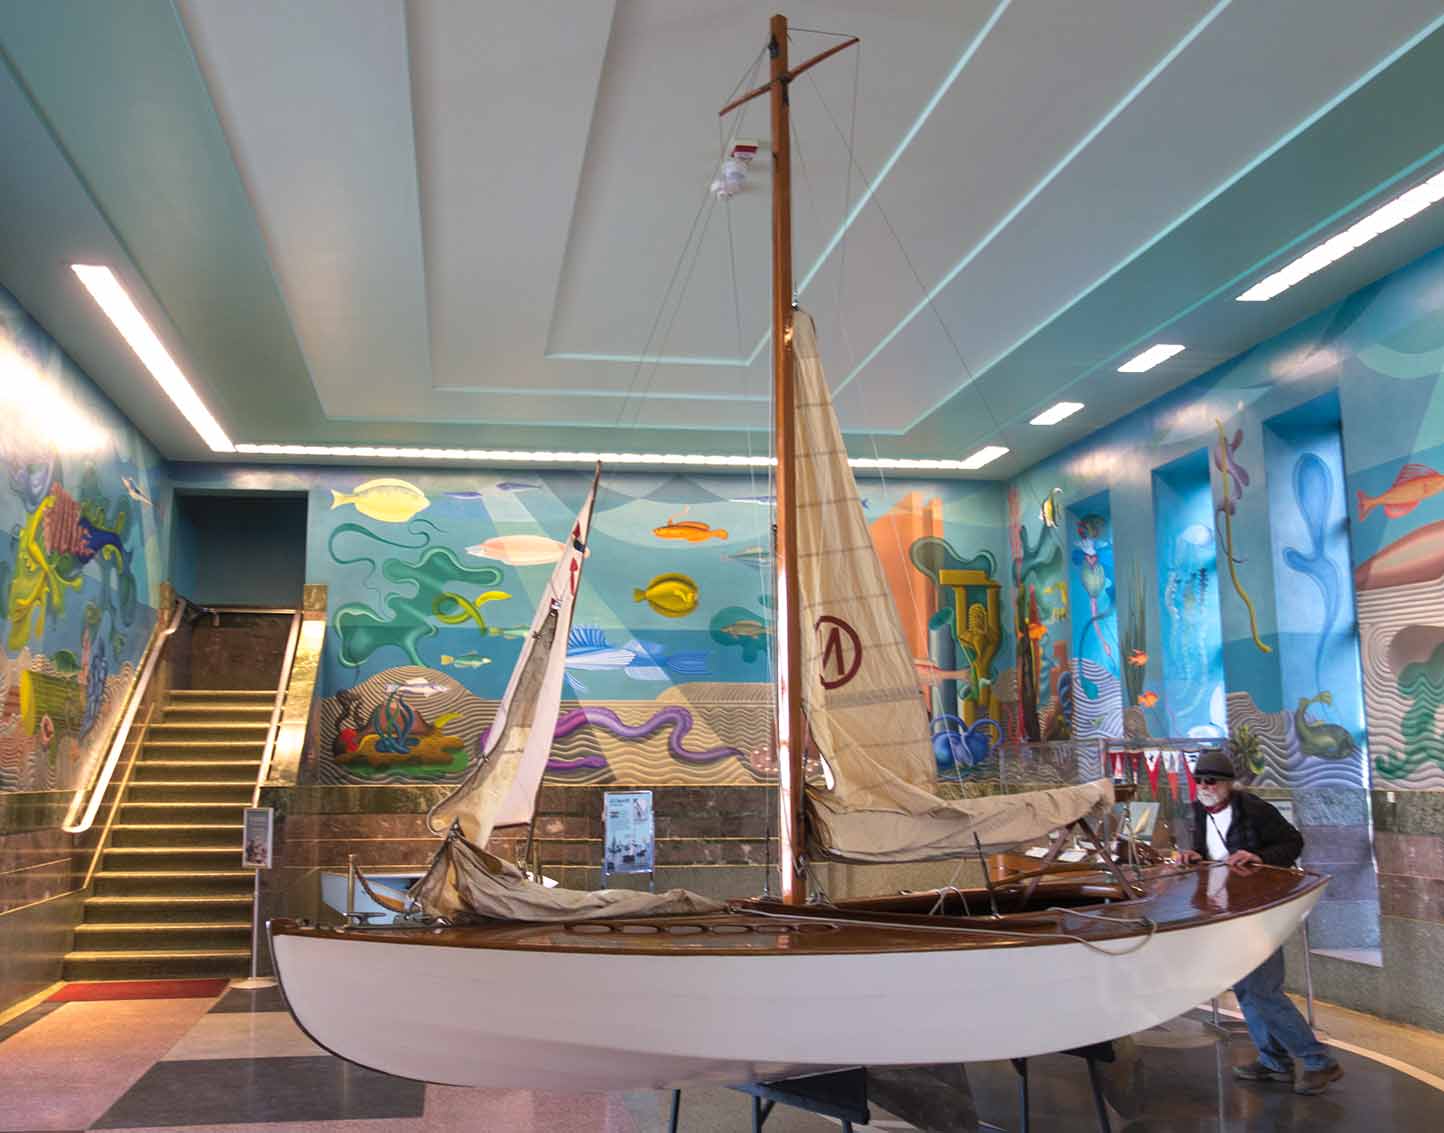 Know our boat: Free Building el toro sailboat